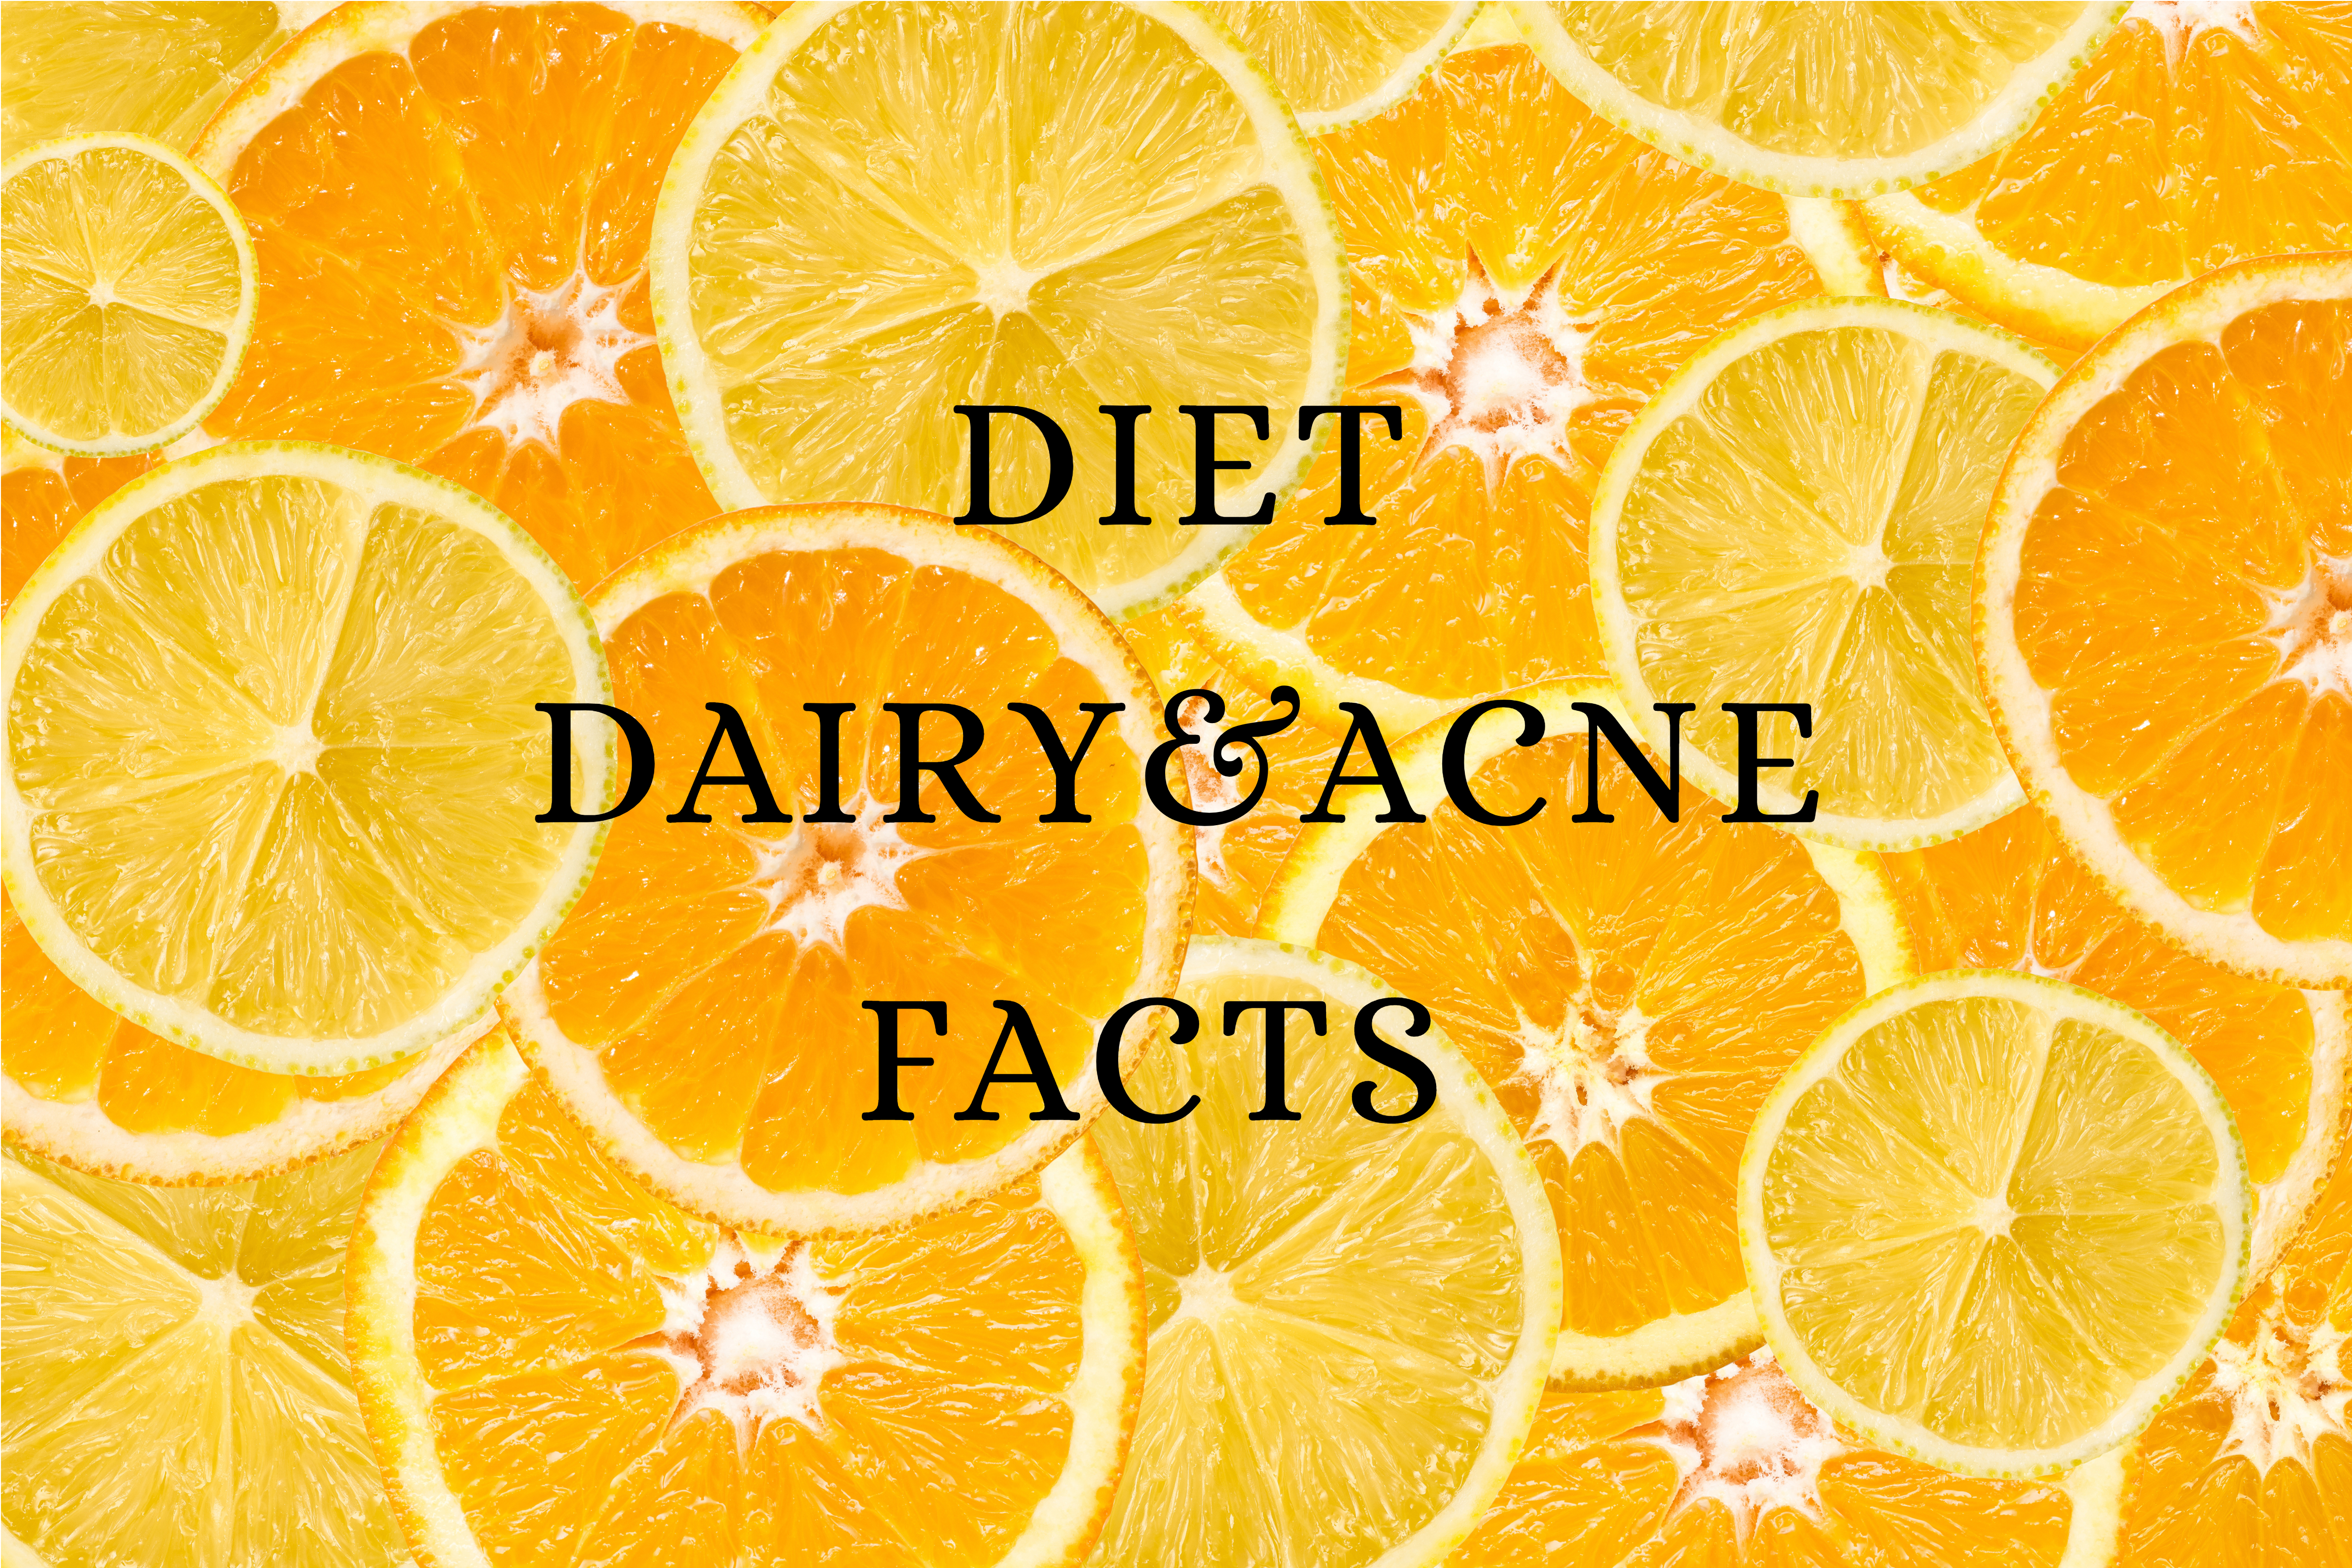 diet dairy and acne